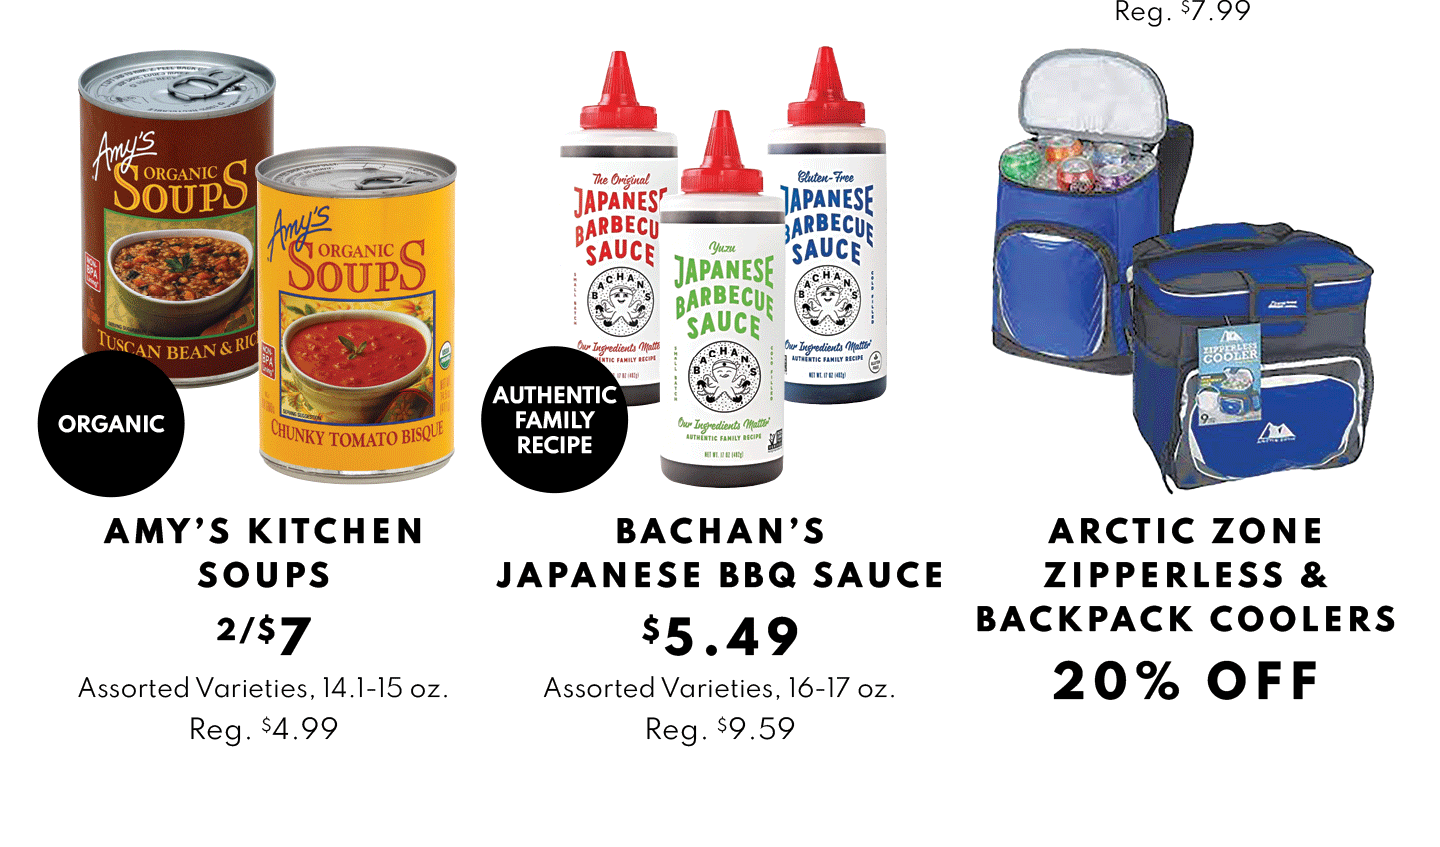 Amys Kitchen Soups 2/$7, Bachan's Japanese BBQ Sauce $5.49 and Arctiz Zone Zipperless & Backpack Coolers 20% OFF